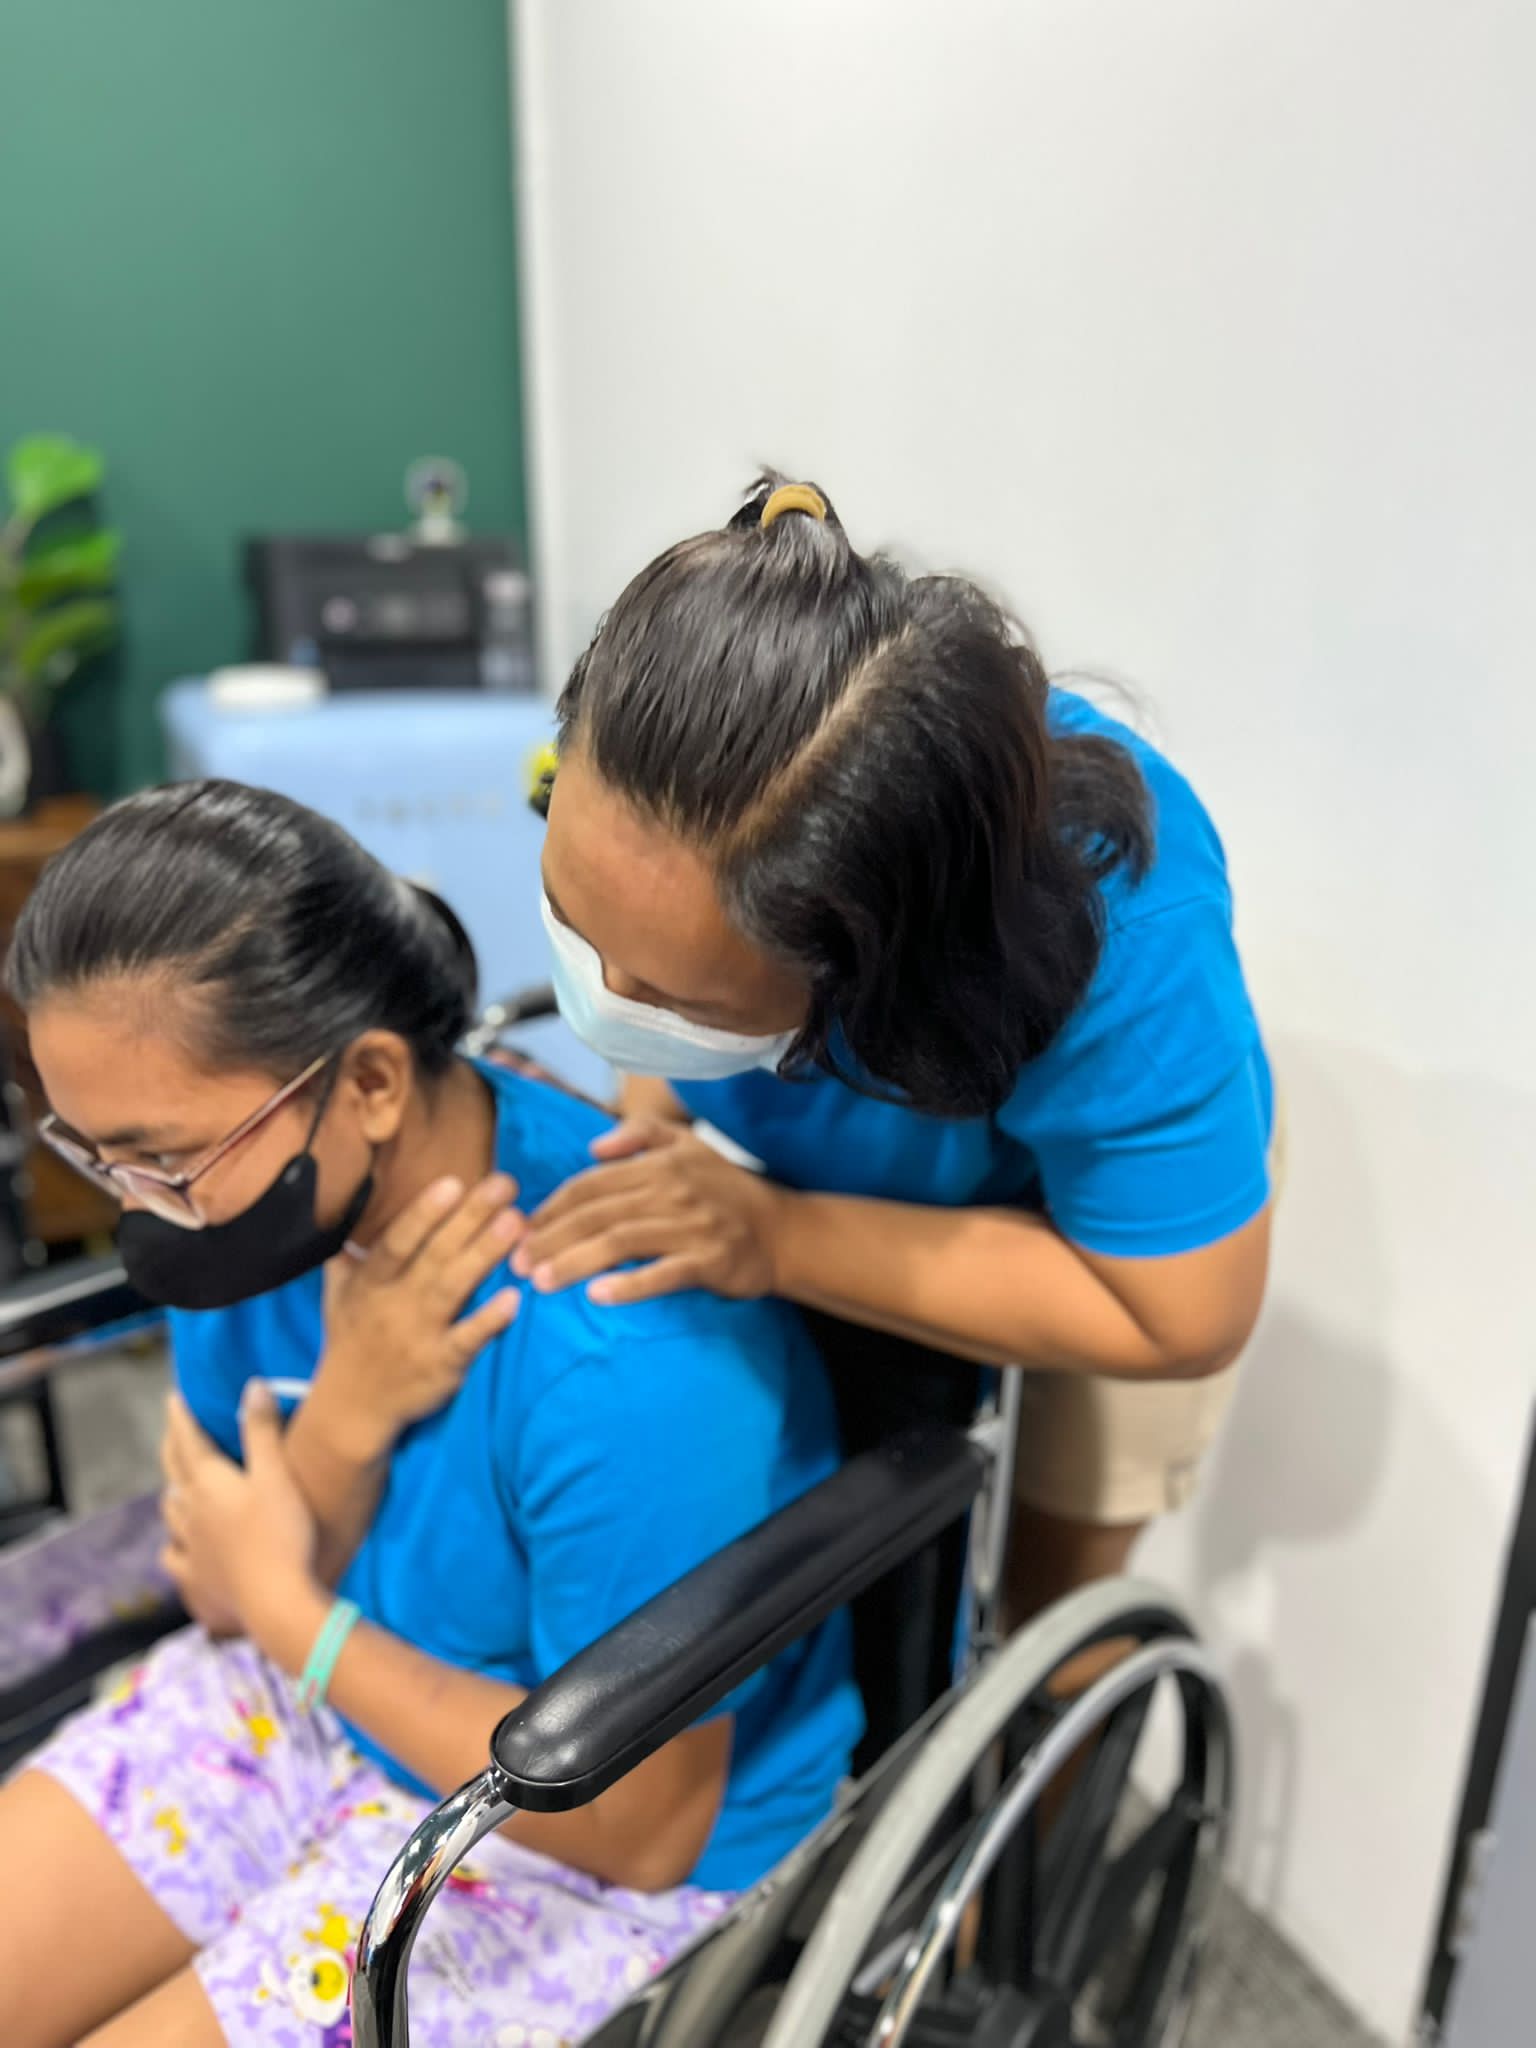 Elder Care Training in Singapore For Domestic Helpers